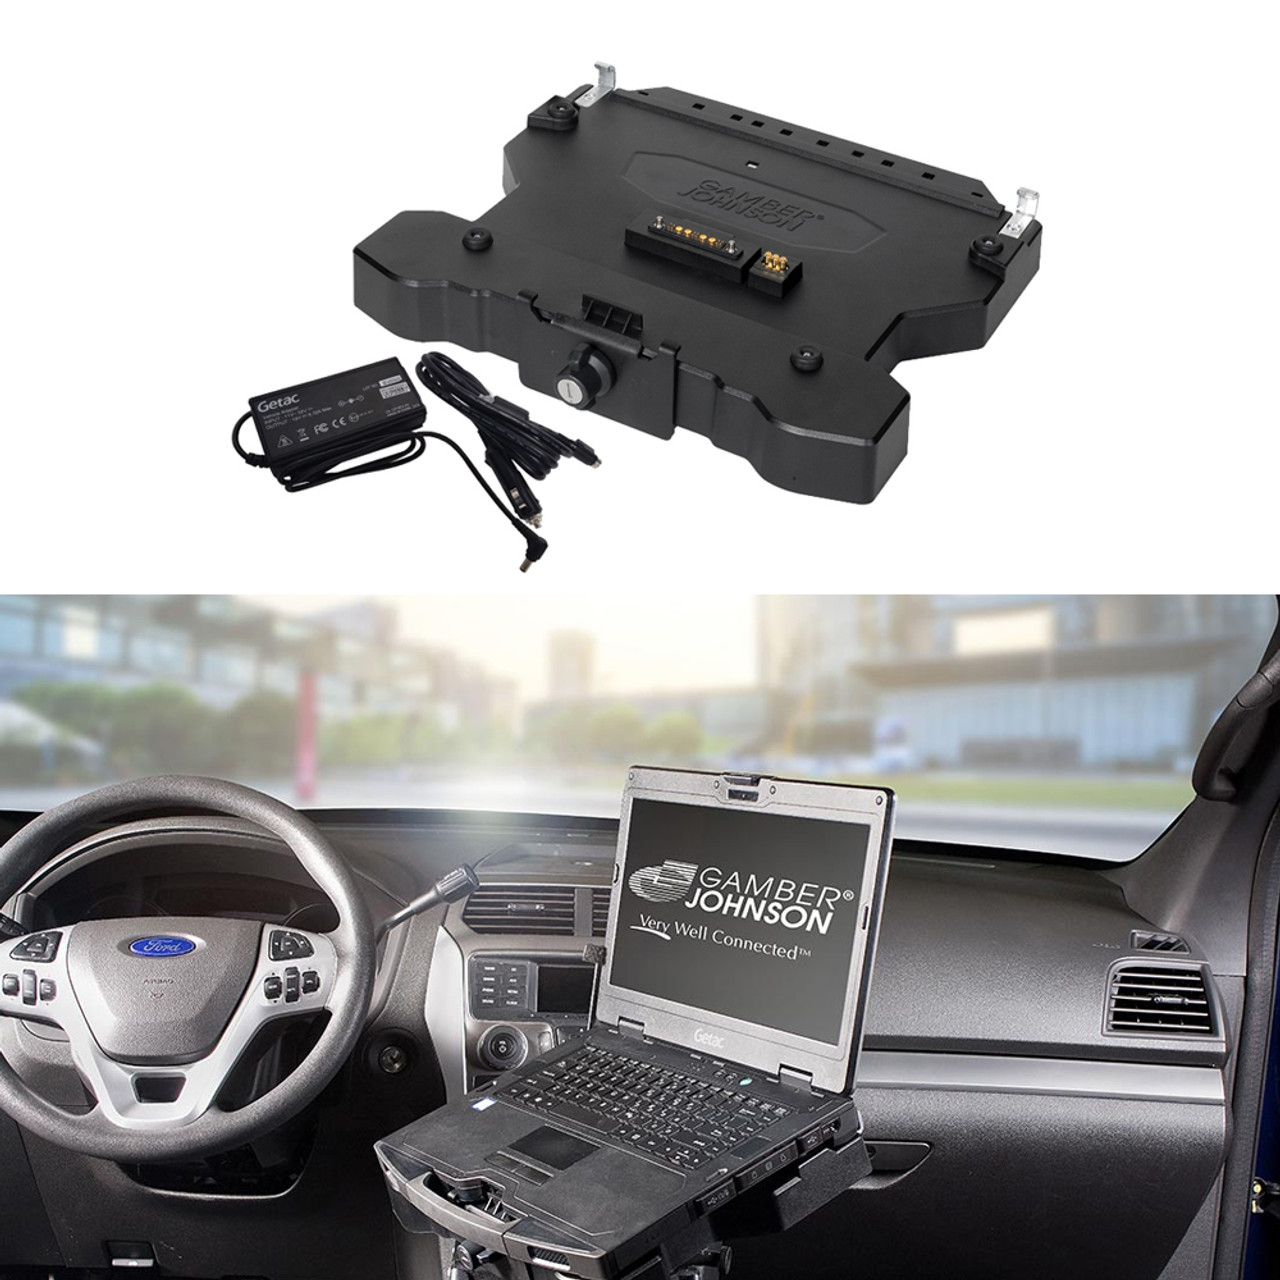 Gamber Johnson Kit: Getac S410 Cradle with Getac 120W Auto Power Supply (No RF) (#7170-0538)